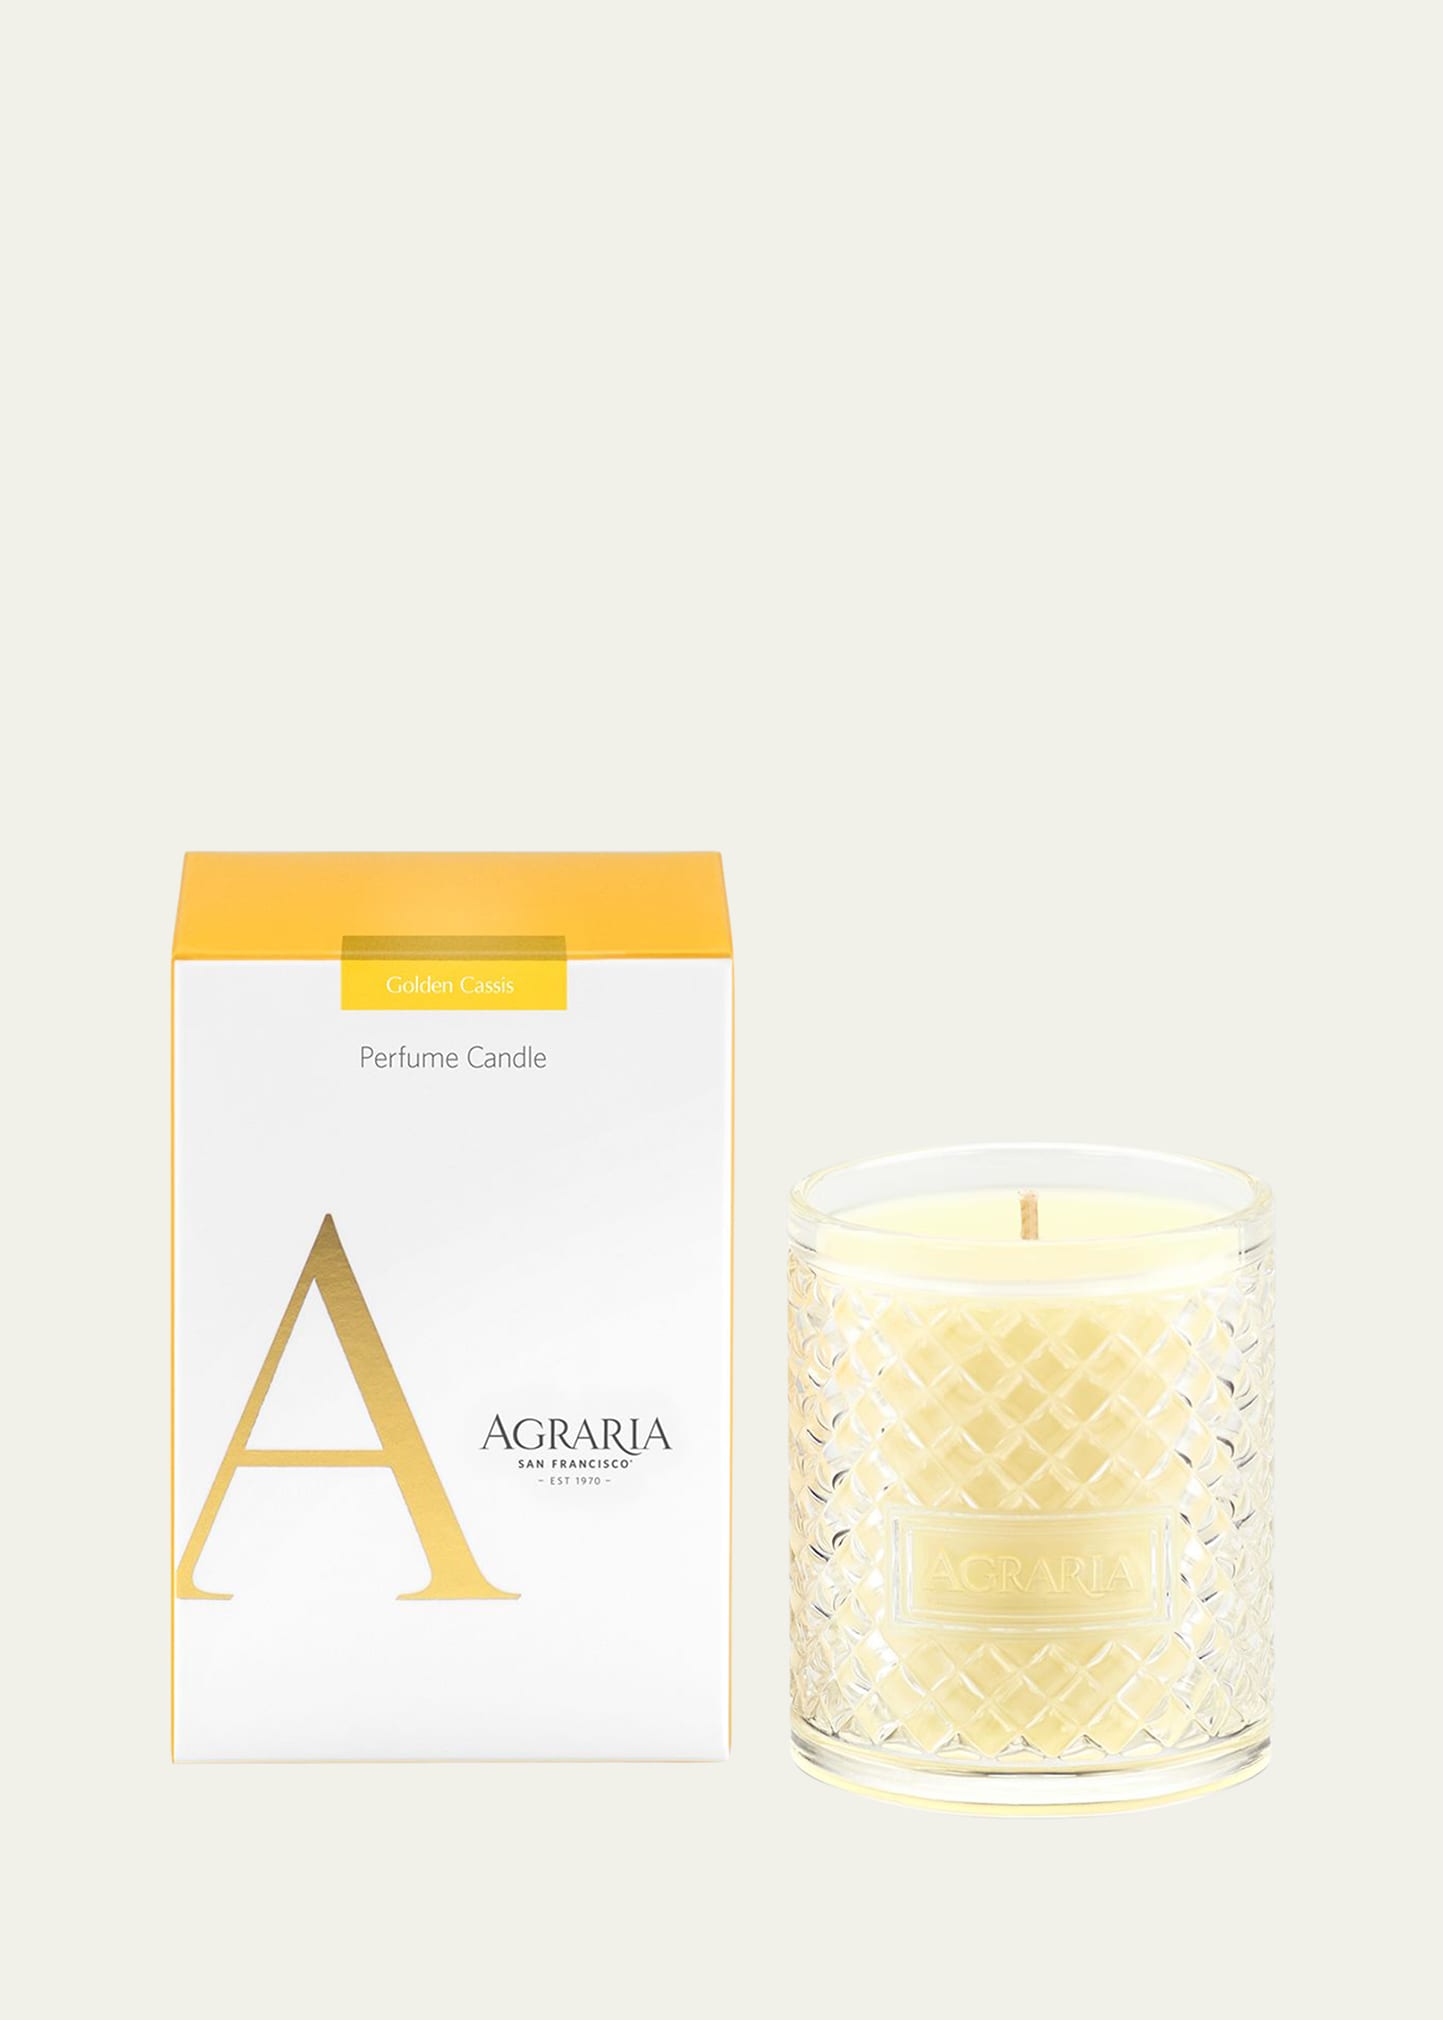 Agraria 7 oz. Golden Cassis Perfume Candle